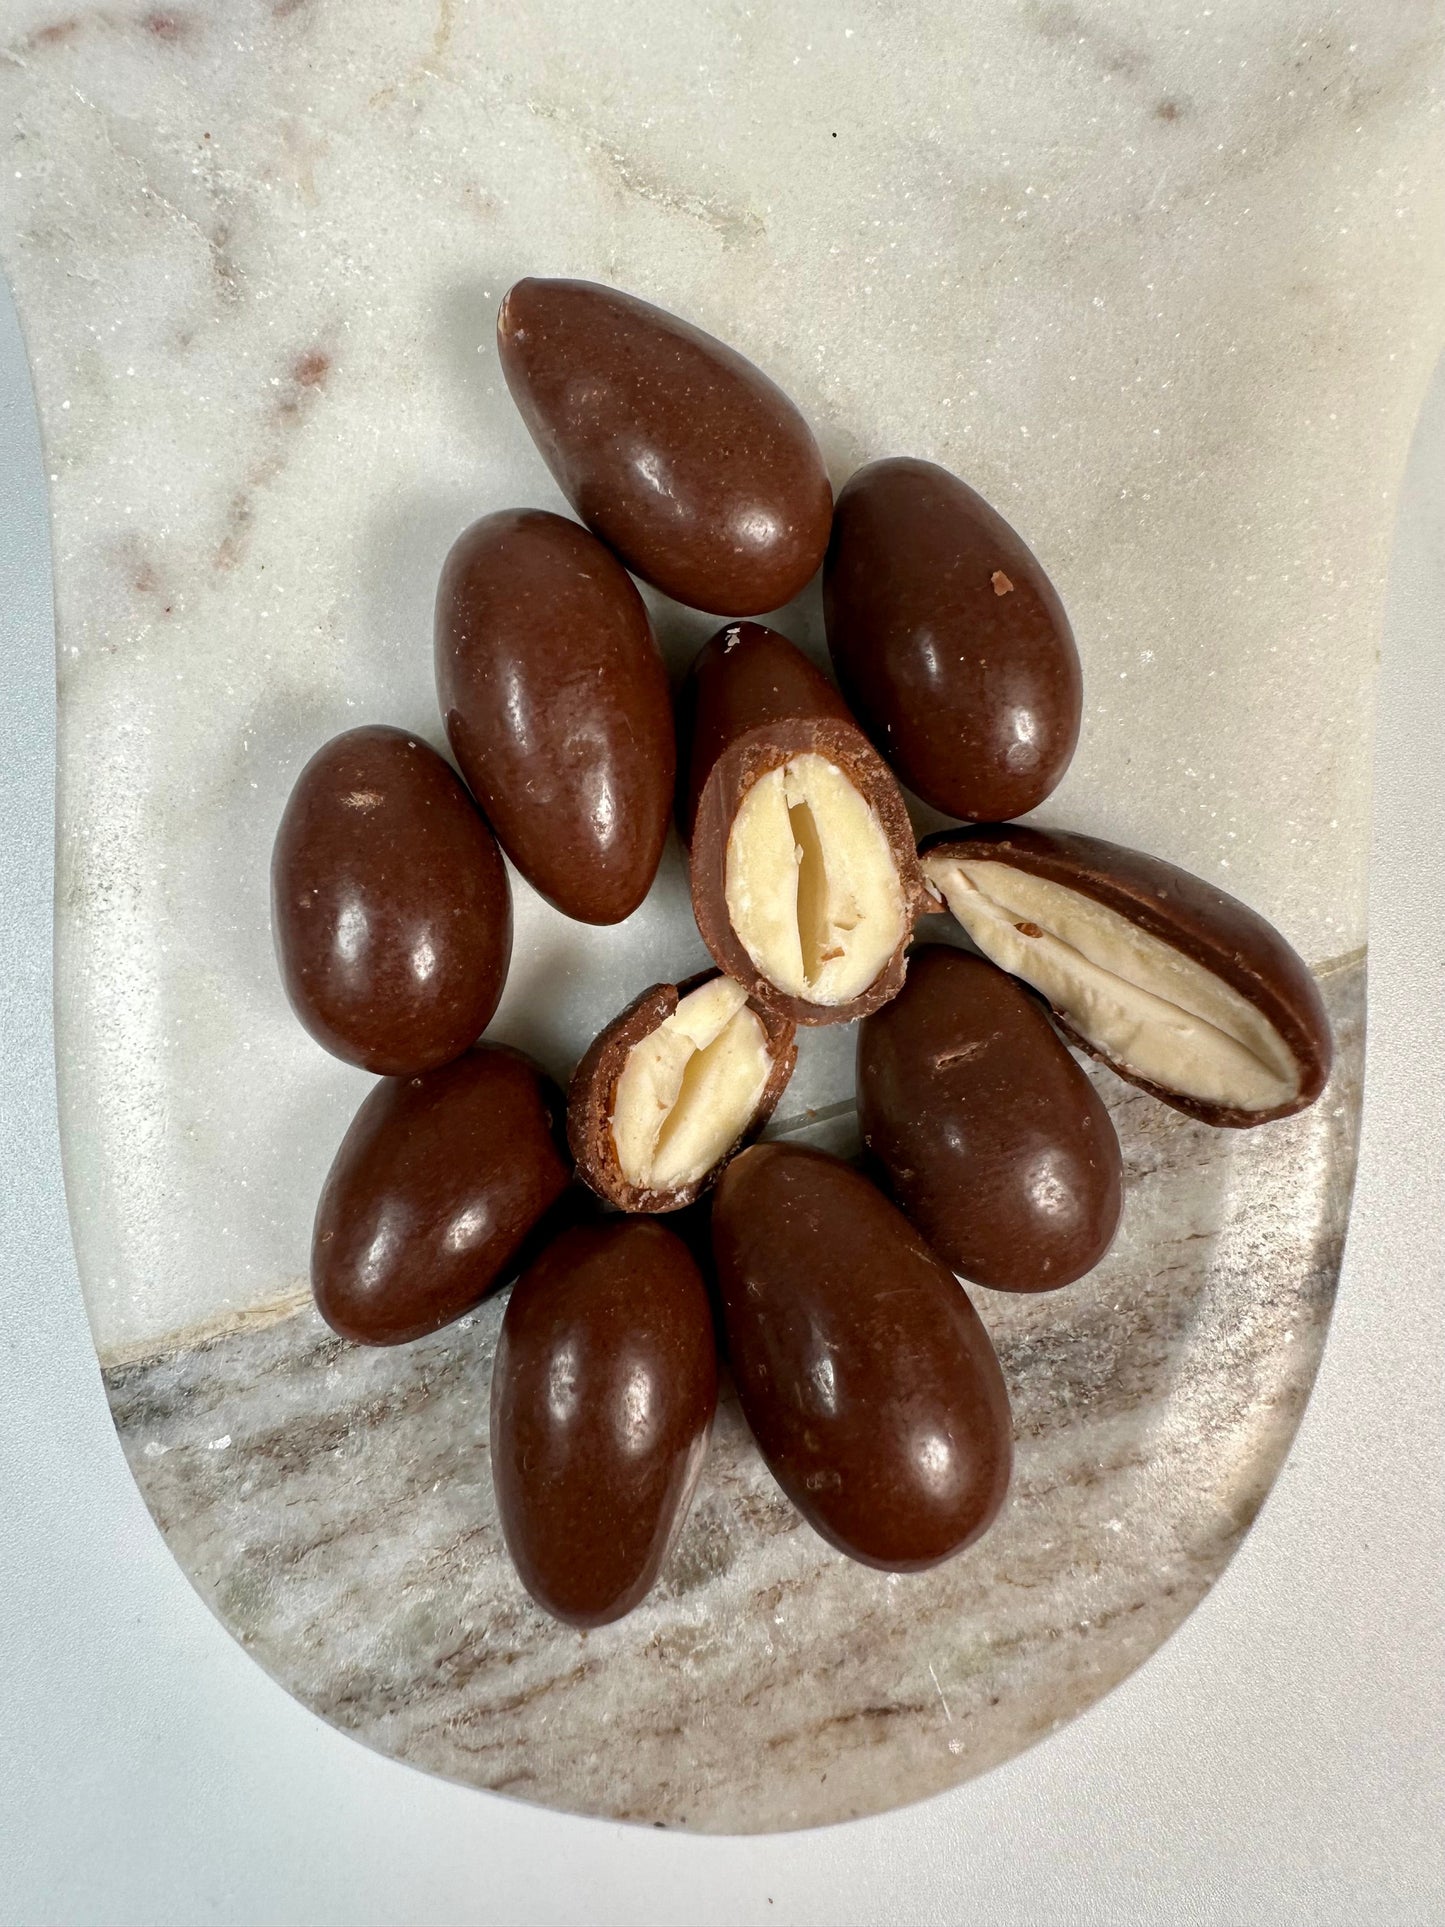 Delicious Oat Milk Chocolate Covered Sprouted Almonds